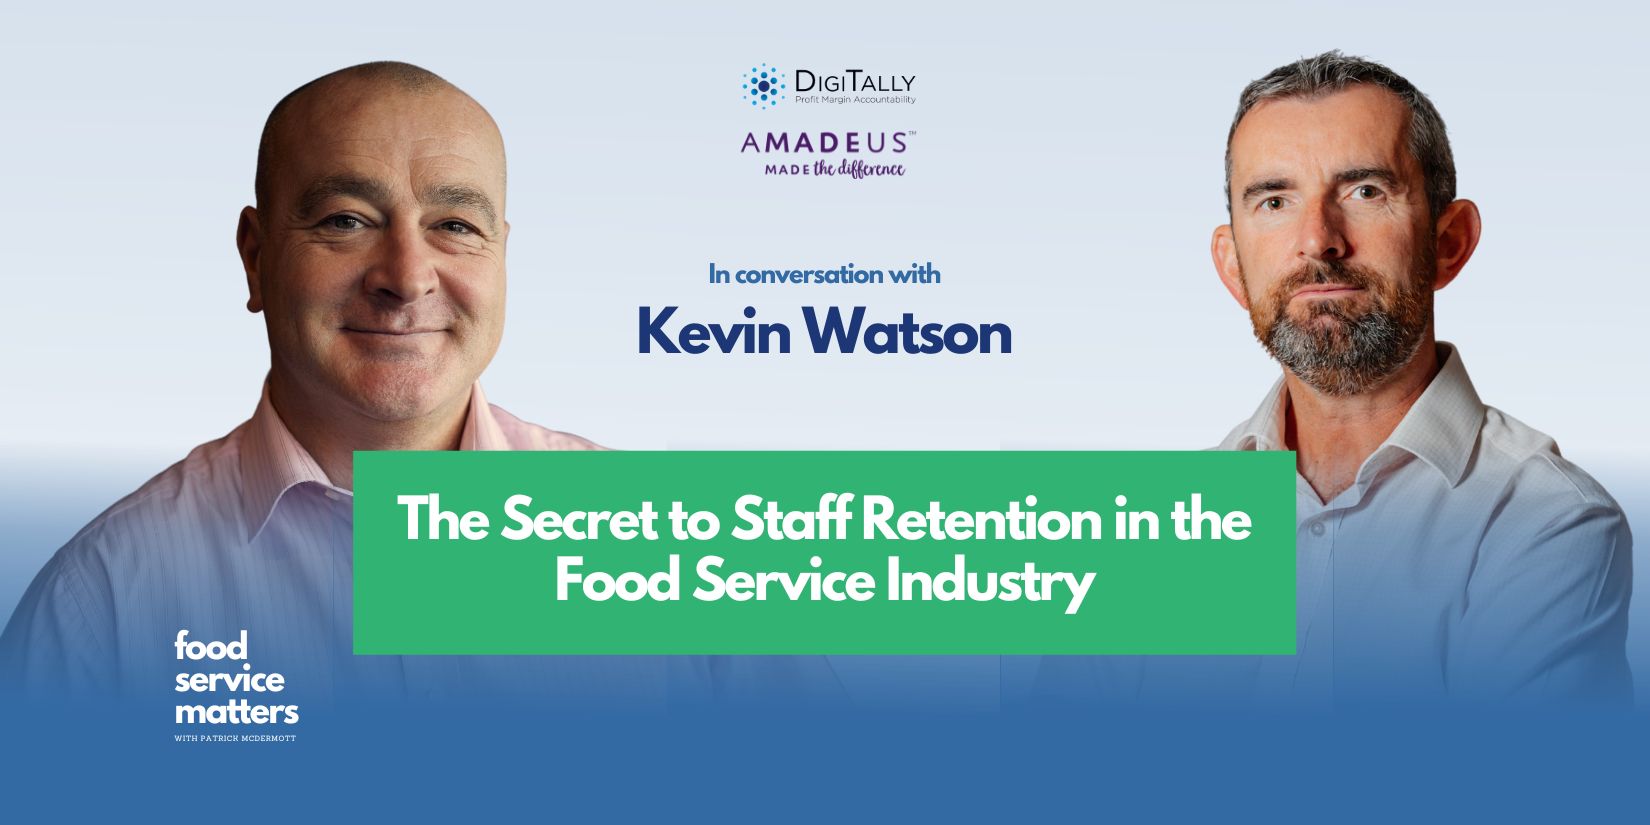 The Secret to Staff Retention in the Food Service Industry